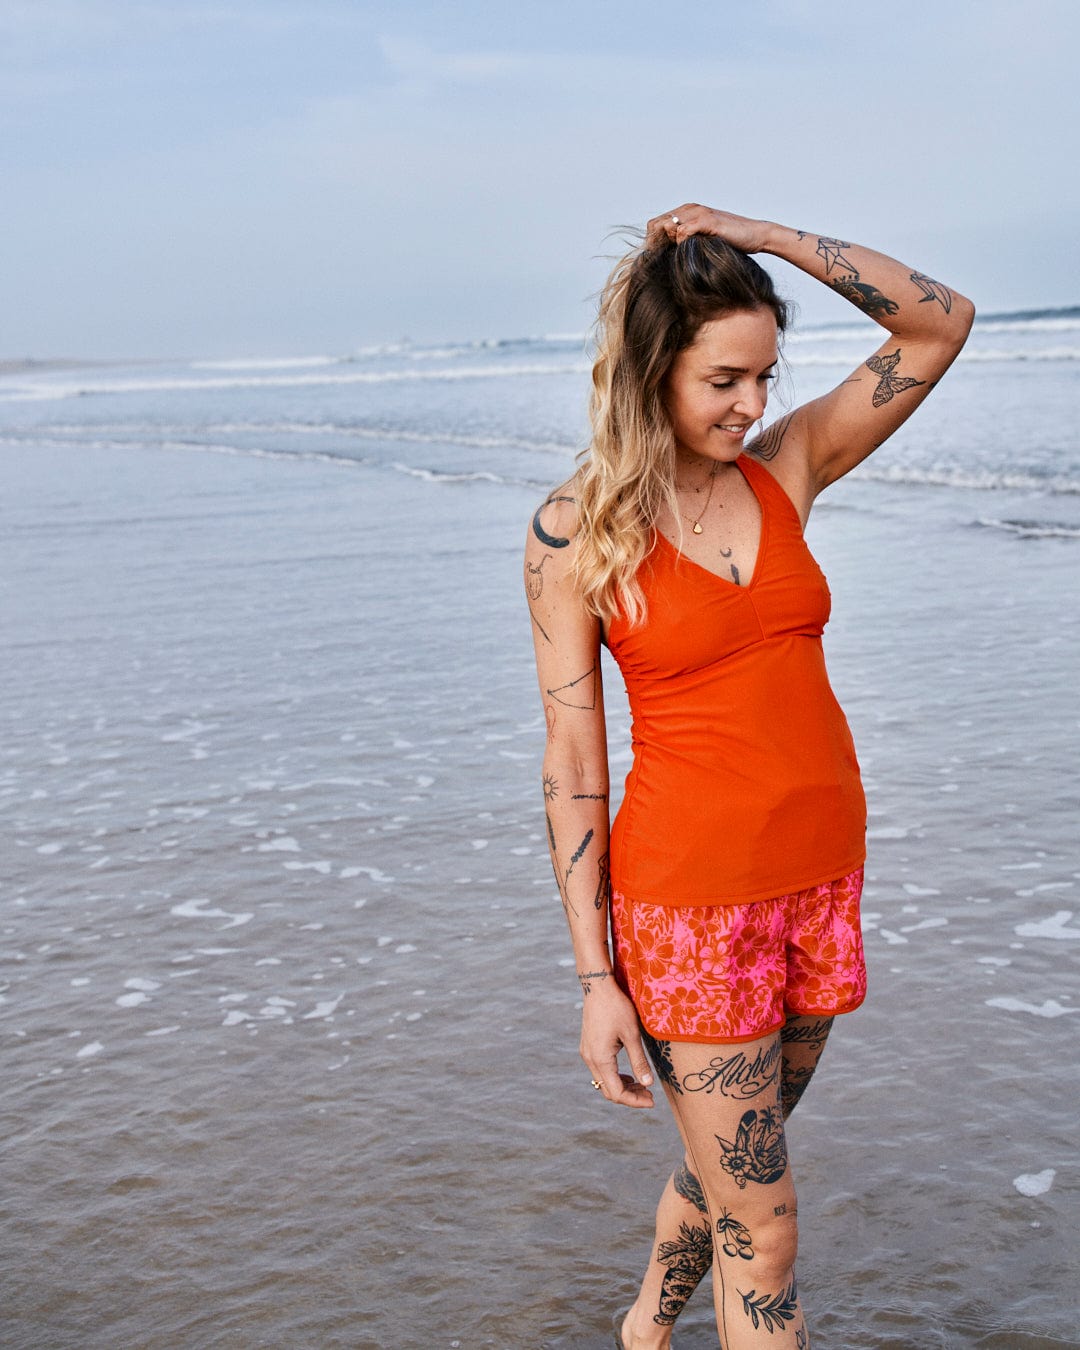 A woman with tattoos standing on a beach, smiling and adjusting her hair, wearing an orange top made of Repreve recycled material and Saltrock's Hibiscus - Womens Boardshorts - Red/Pink.